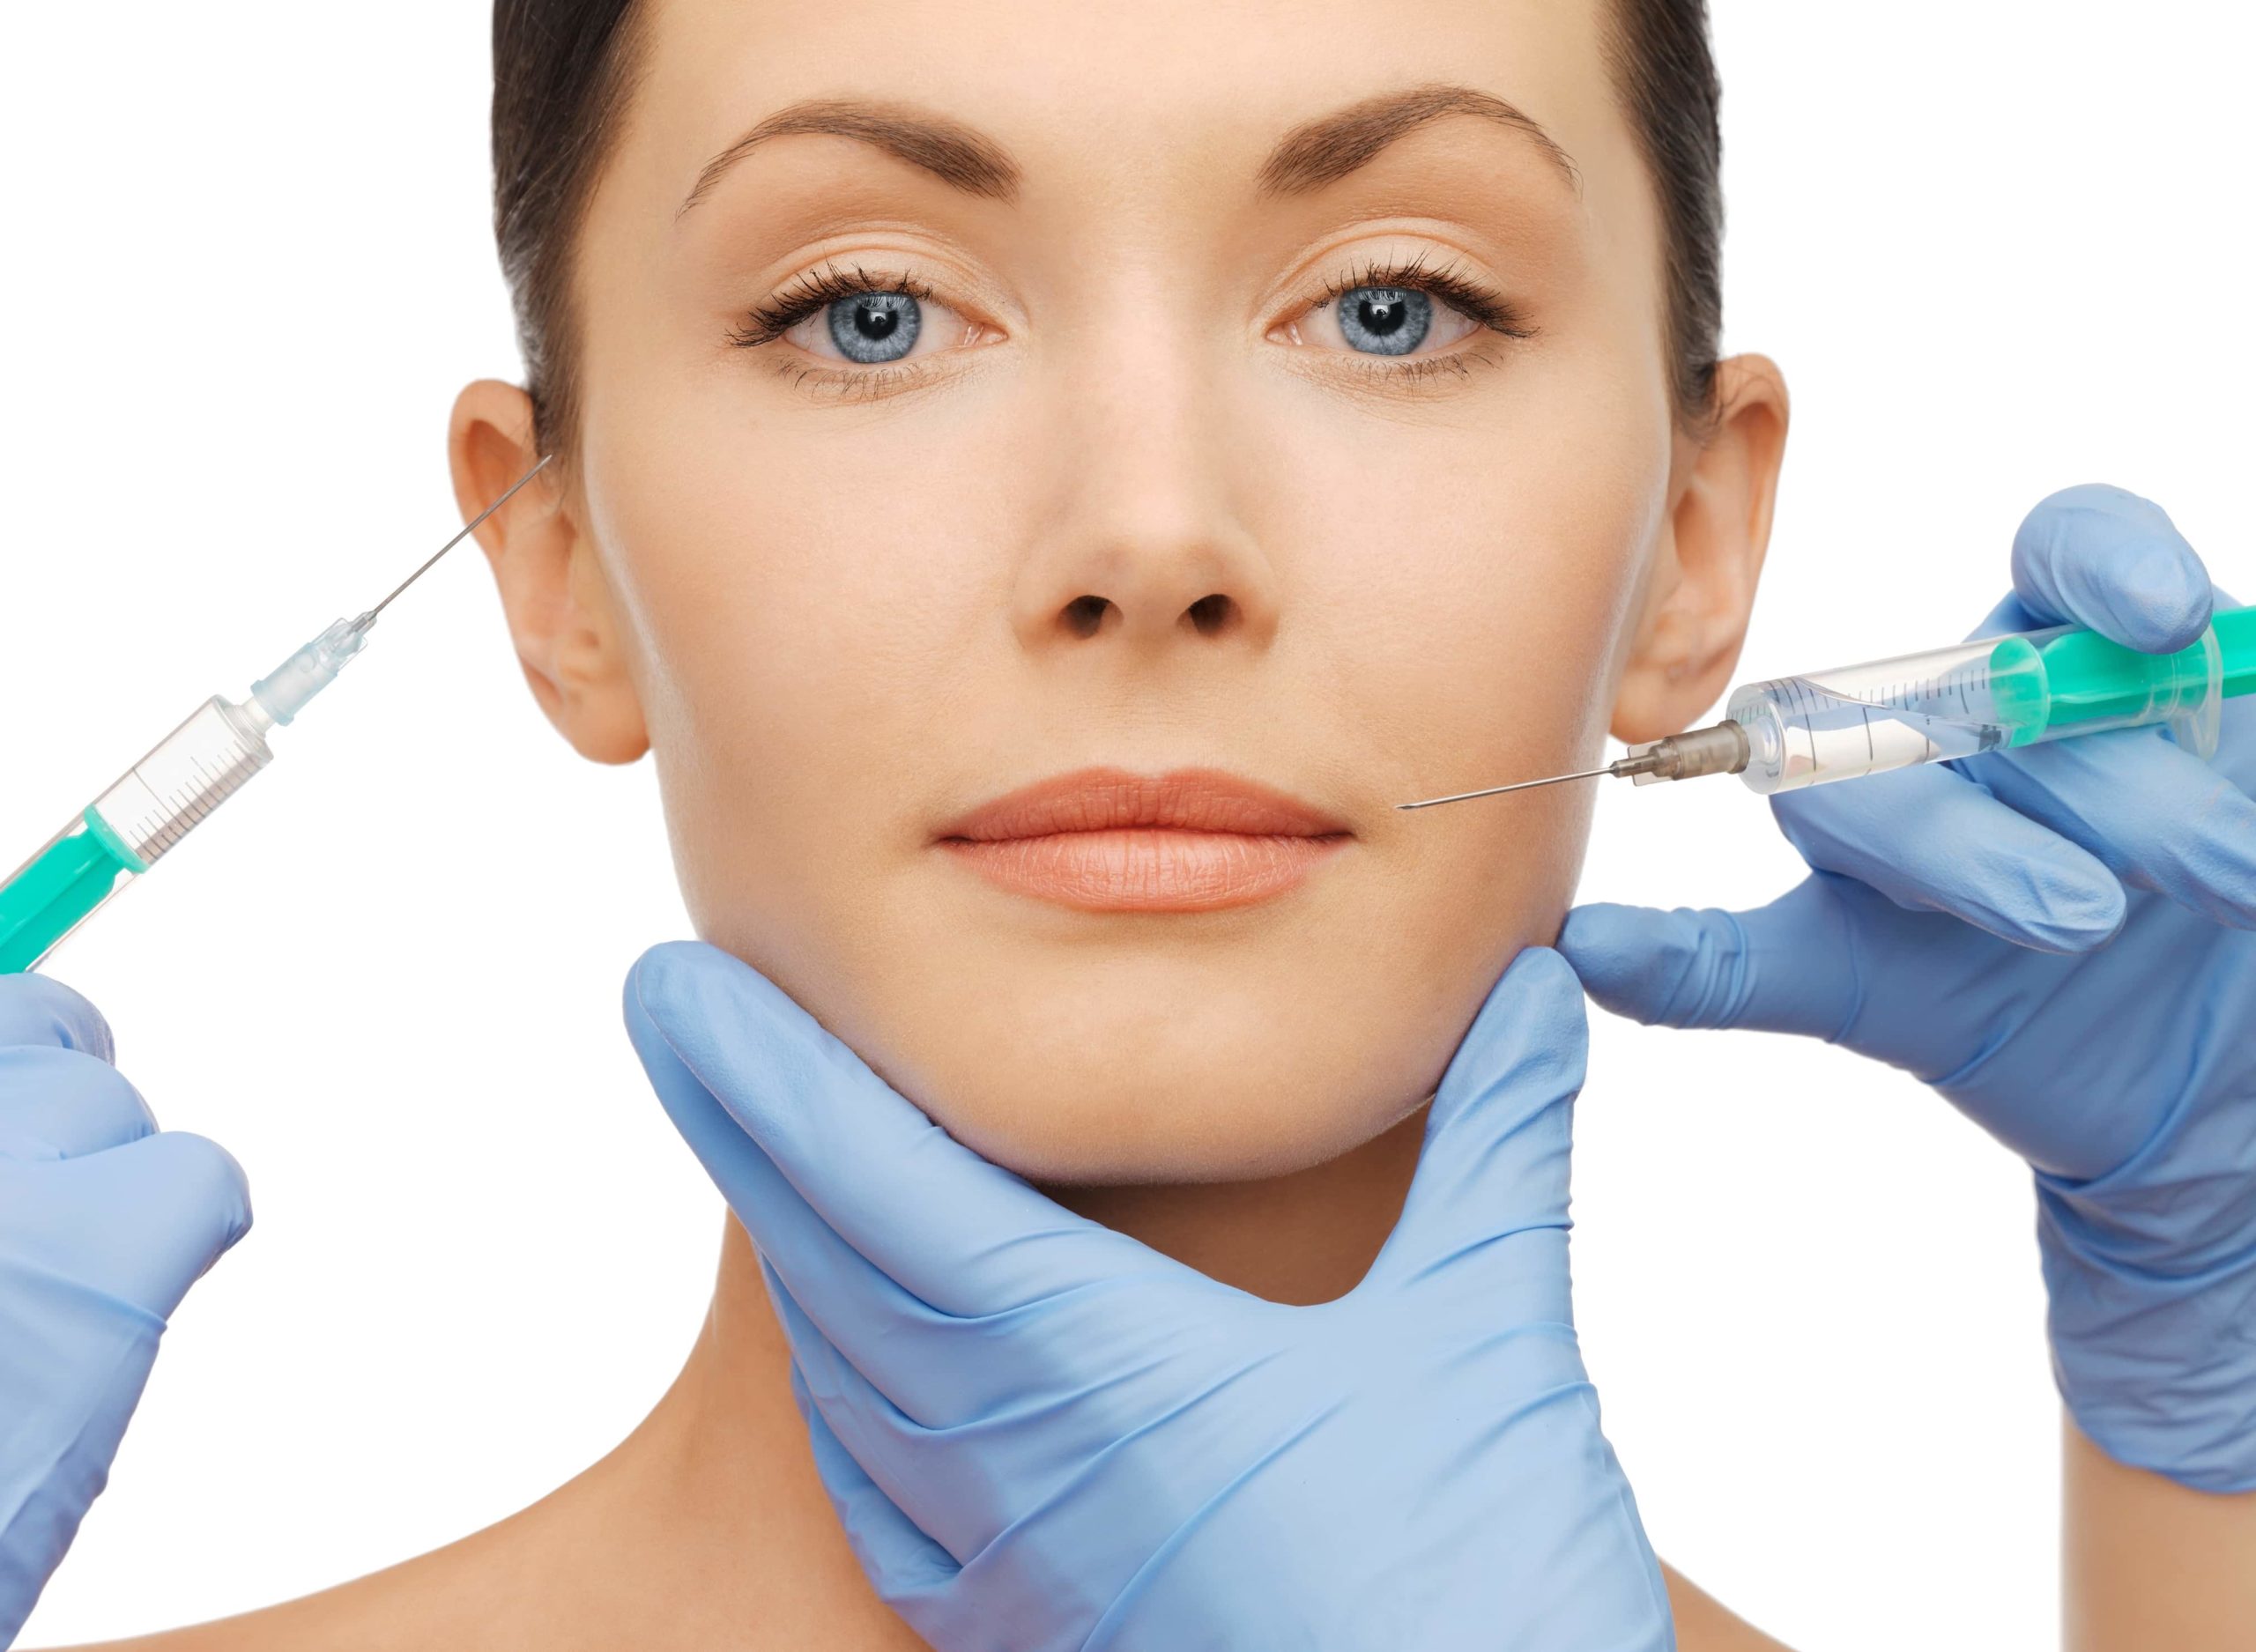 What is the difference between dermal fillers and botox